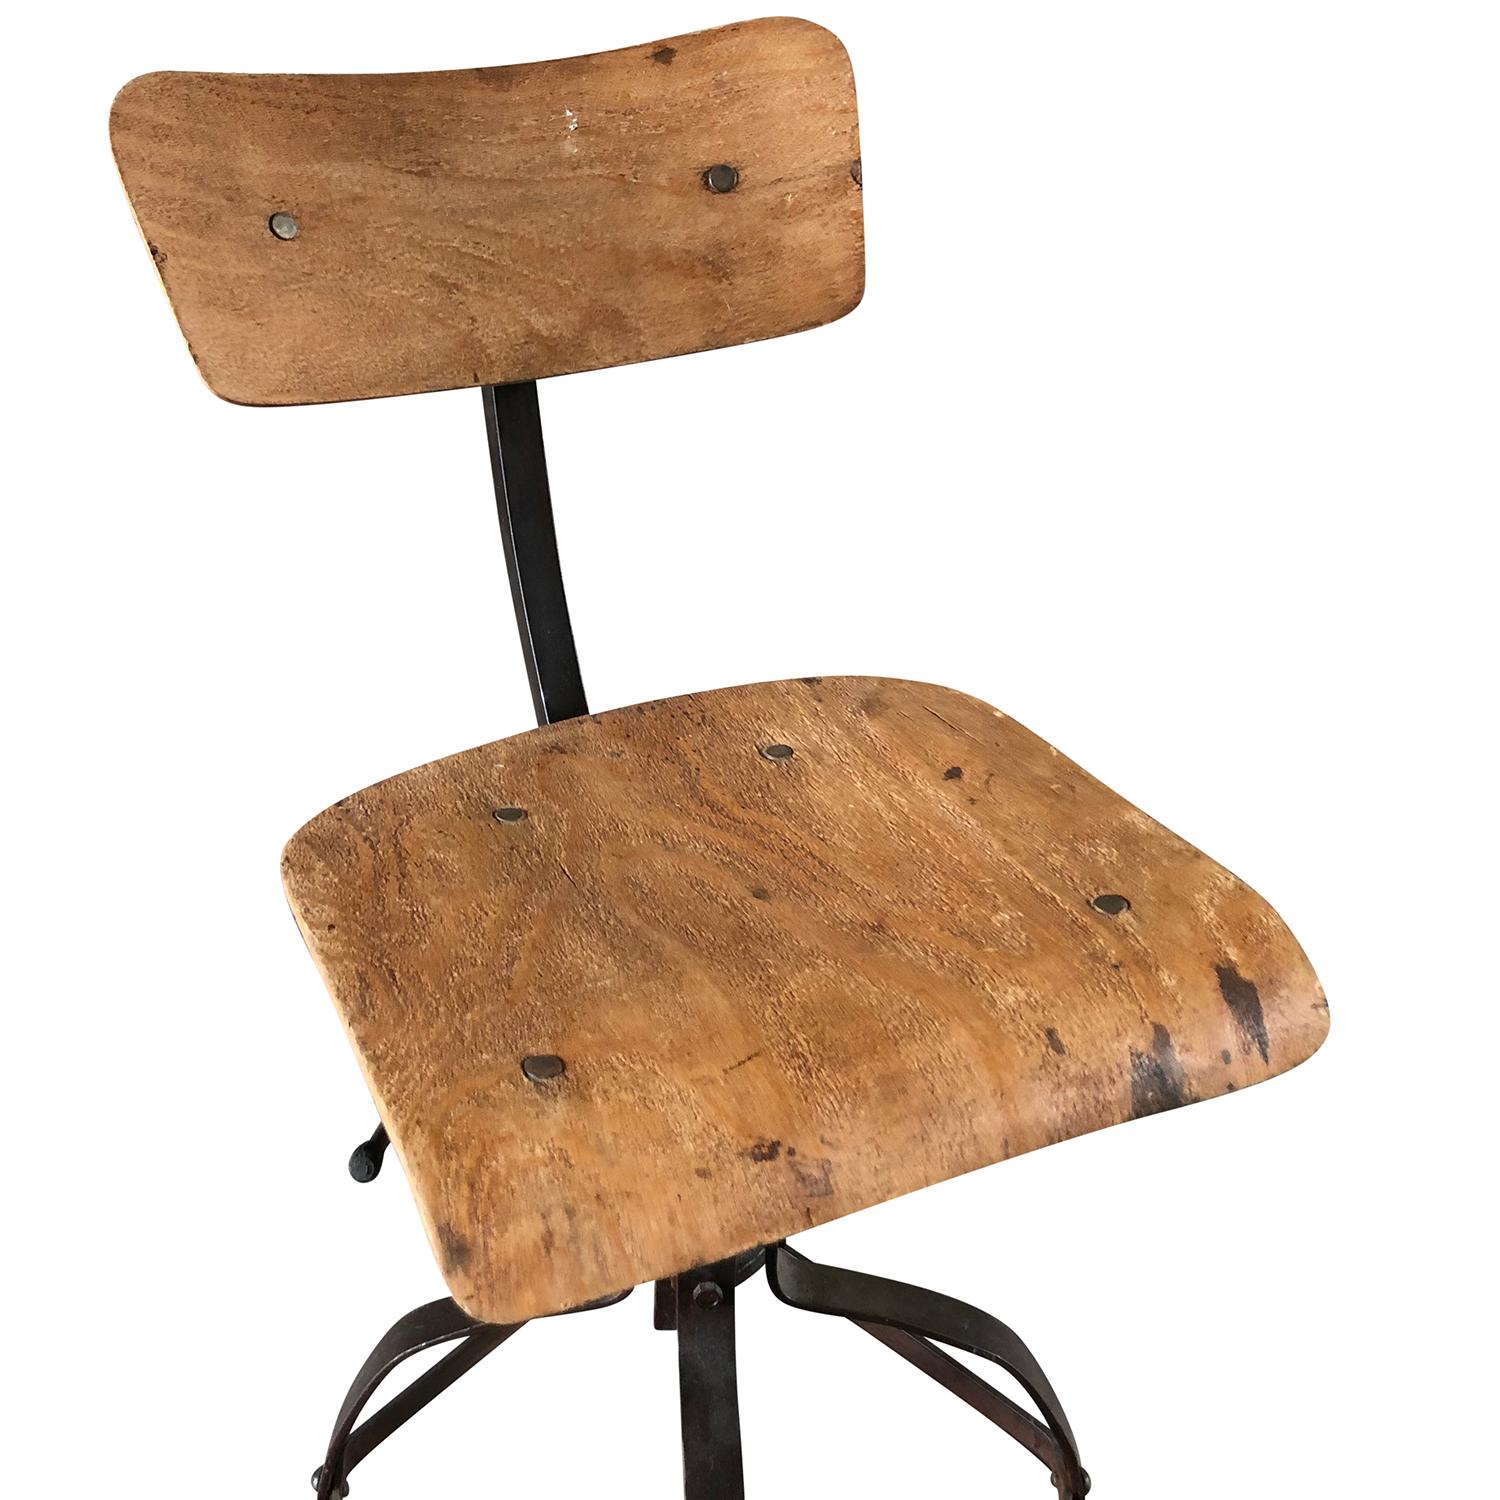 A light-brown, vintage French industrial iron workshop chair with metal framing and a wooden seat made of hand carved plywood, the seat height is adjustable. Designed by Henri Lieber and produced by Flambo, in good condition. Wear consistent with